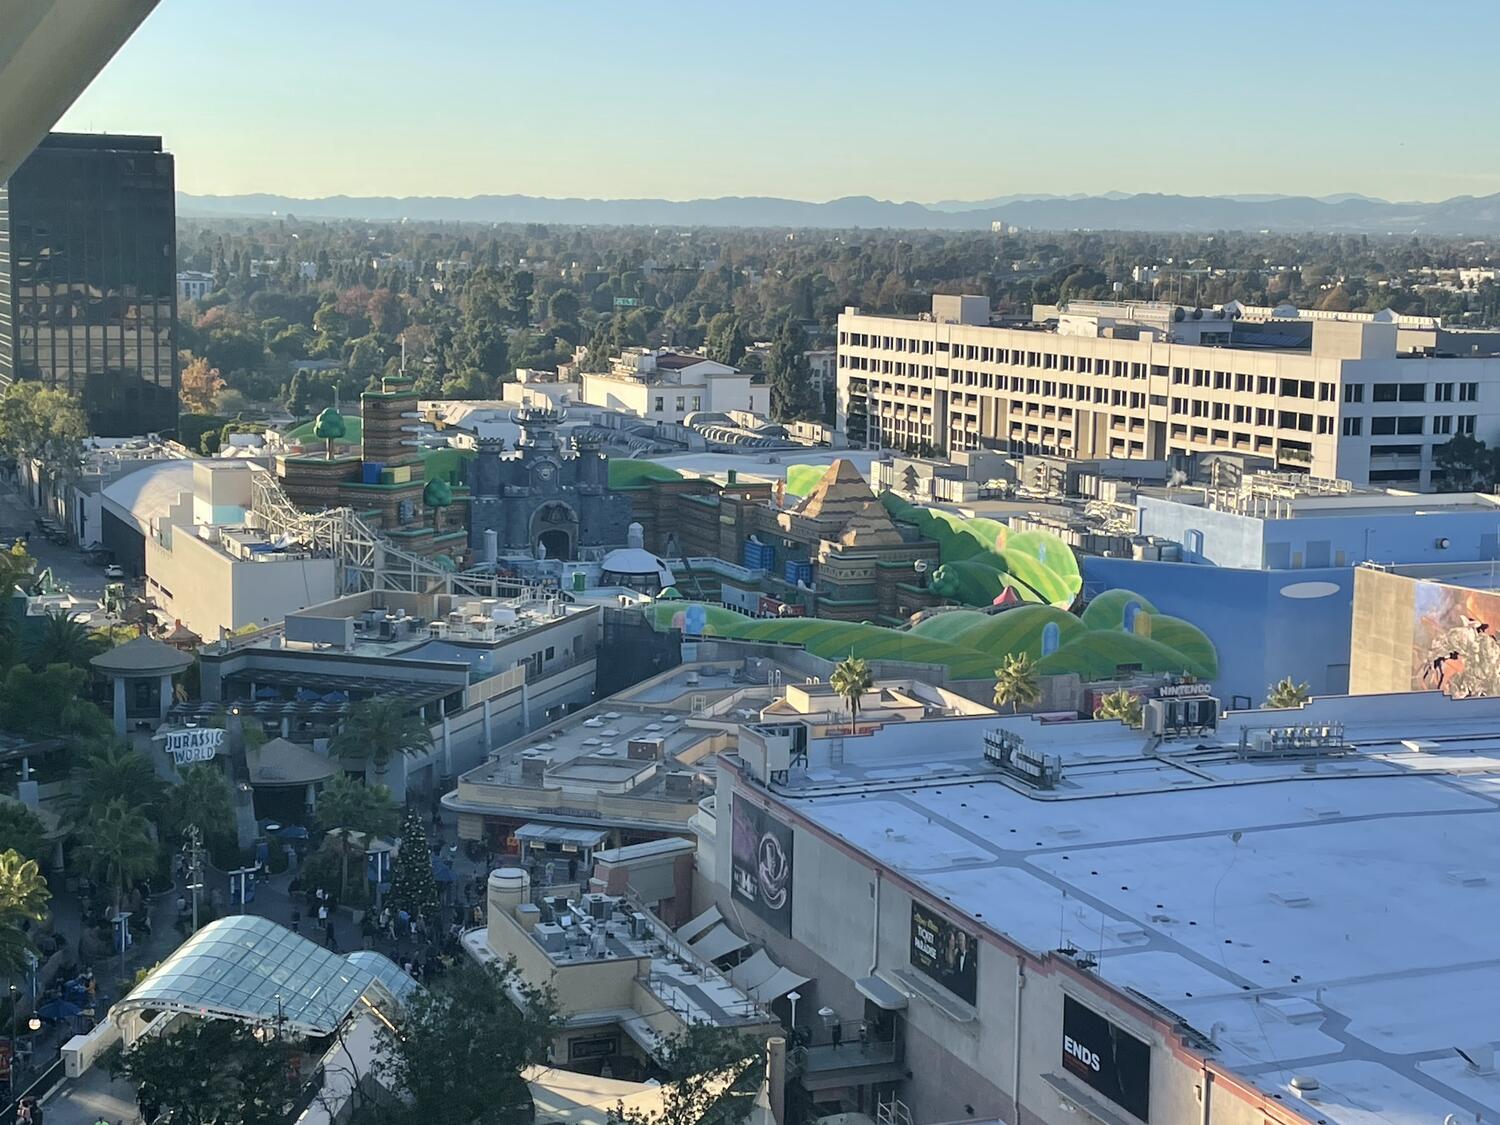 A distant shot of the new Super Nintendo World at Universal Studios as seen from the escalators, still under construction but looking close to finished.